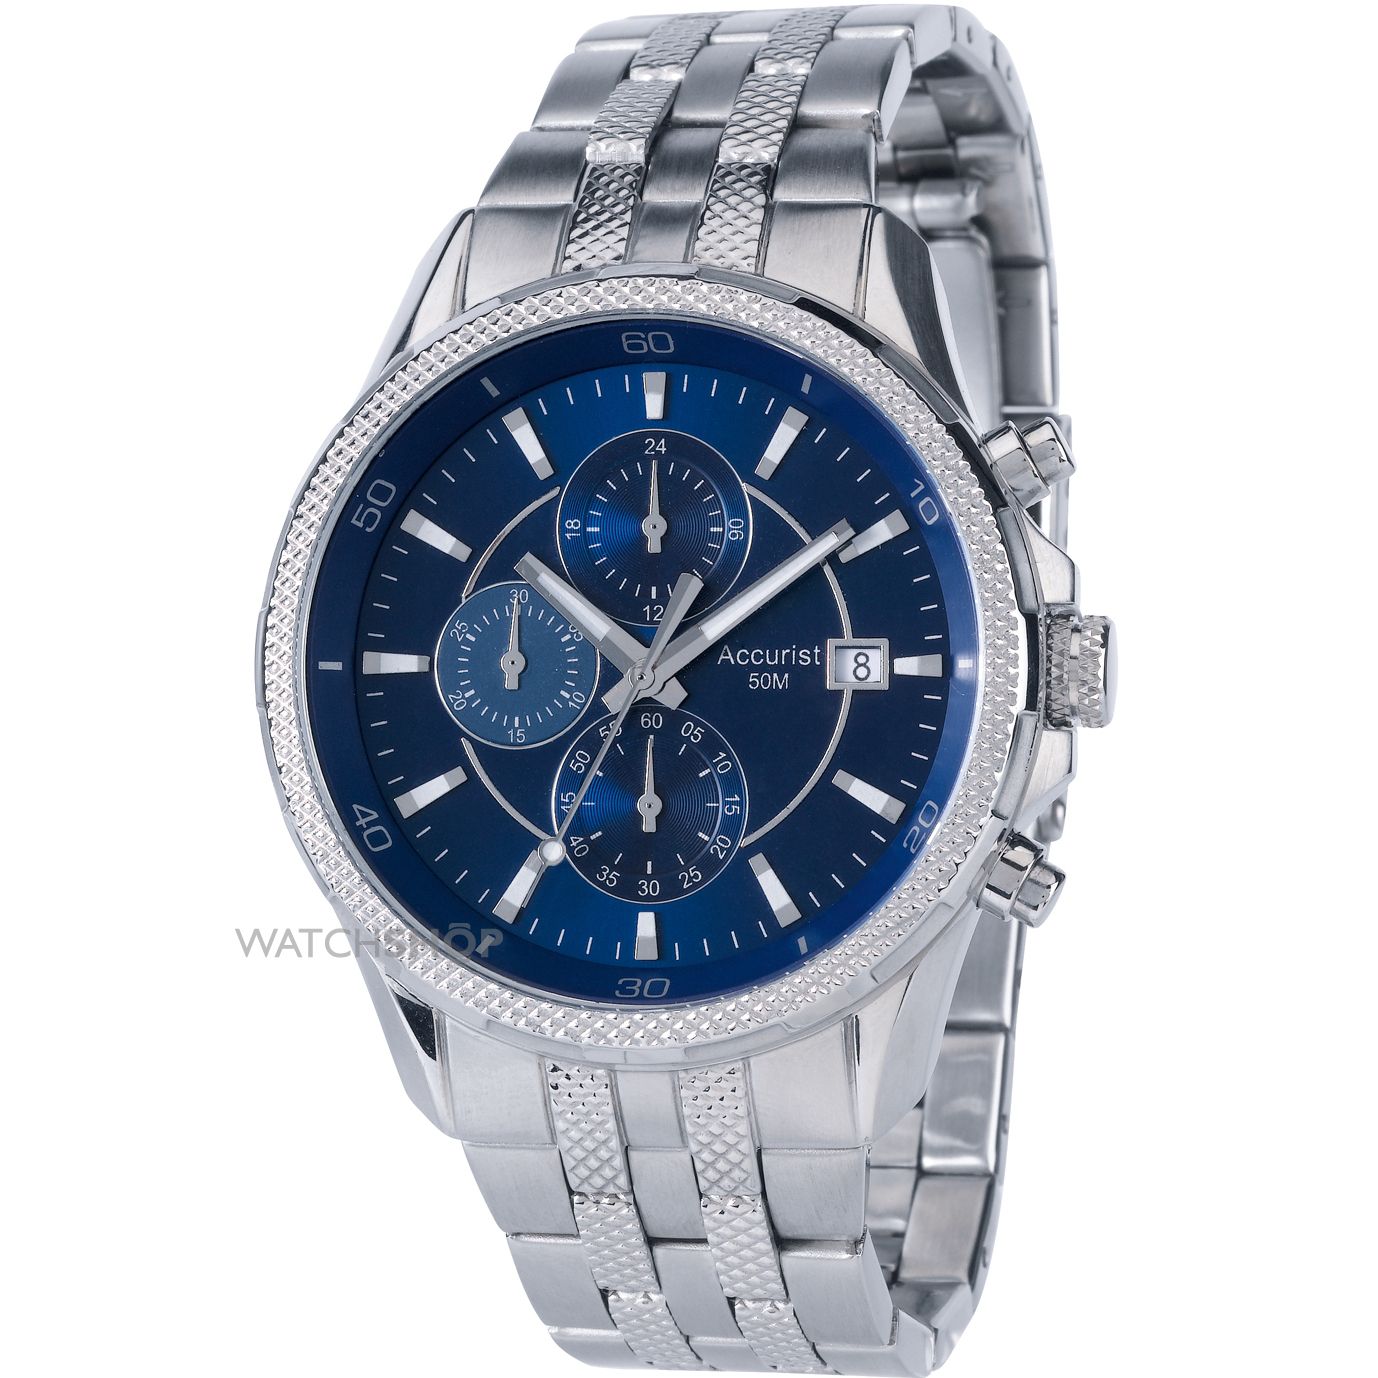 Accurist Men's Quartz Watch With Blue Dial Chronograph Display And Stainless Steel Bracelet MB935N